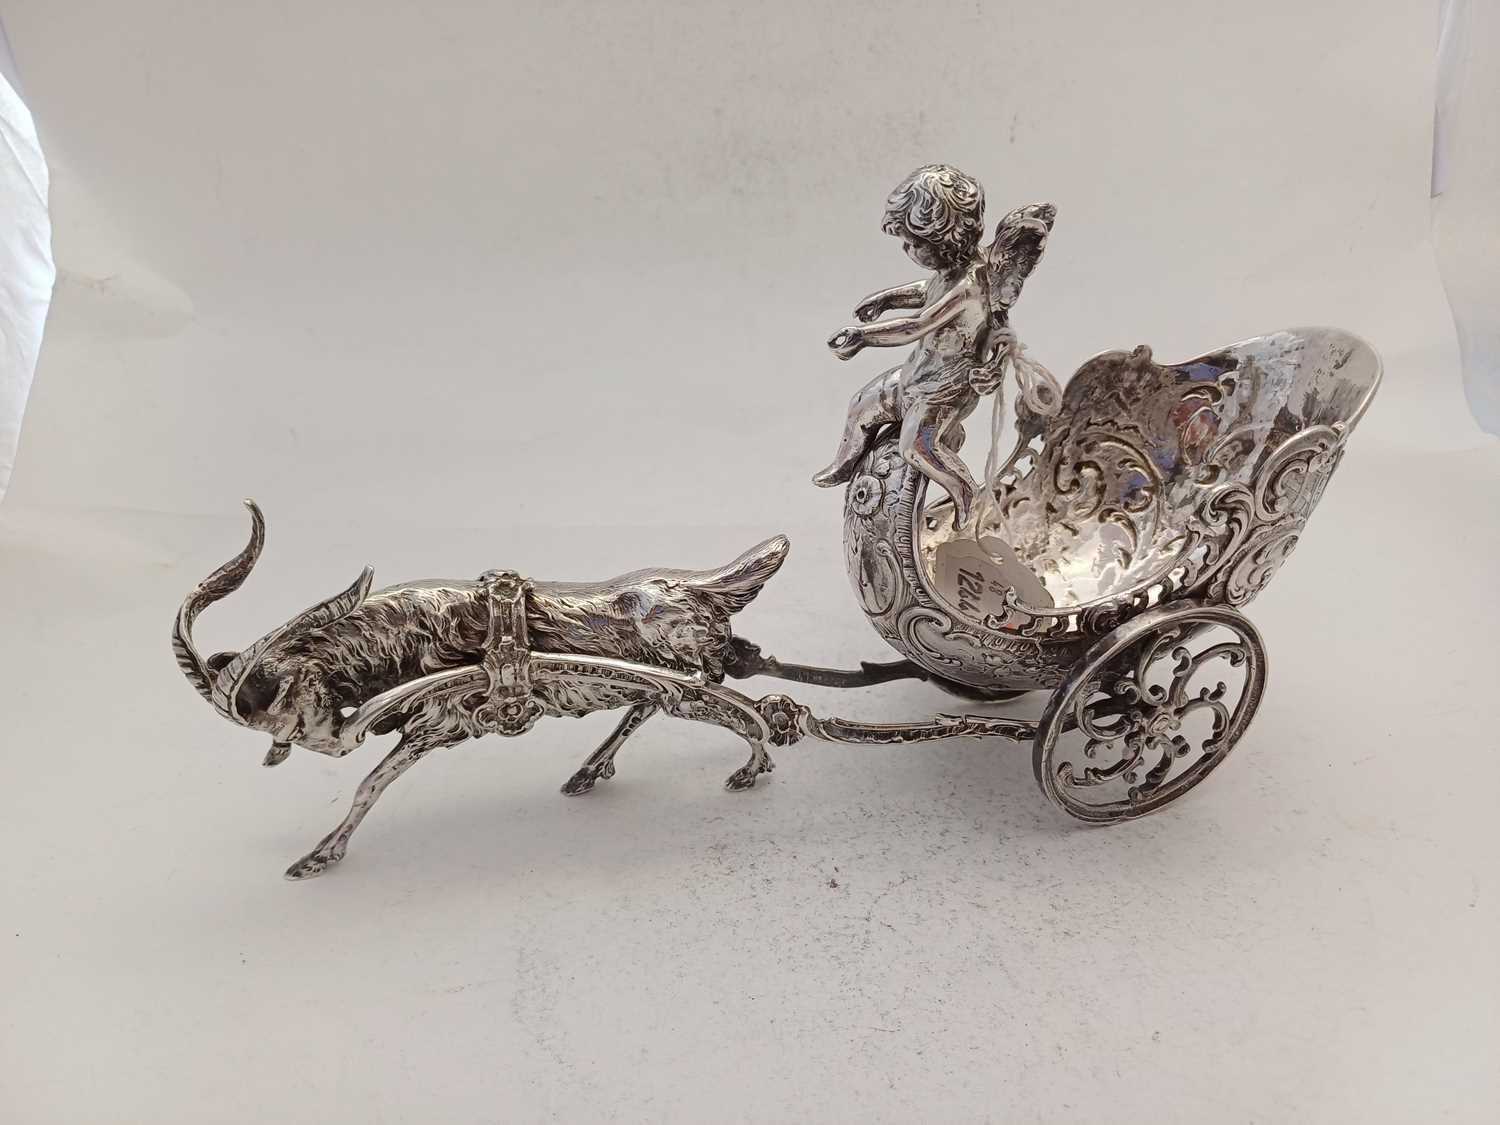 A German Silver Model of a Goat and Putto, by Neresheimer, Hanau, With English Import Marks for Ber - Image 9 of 9